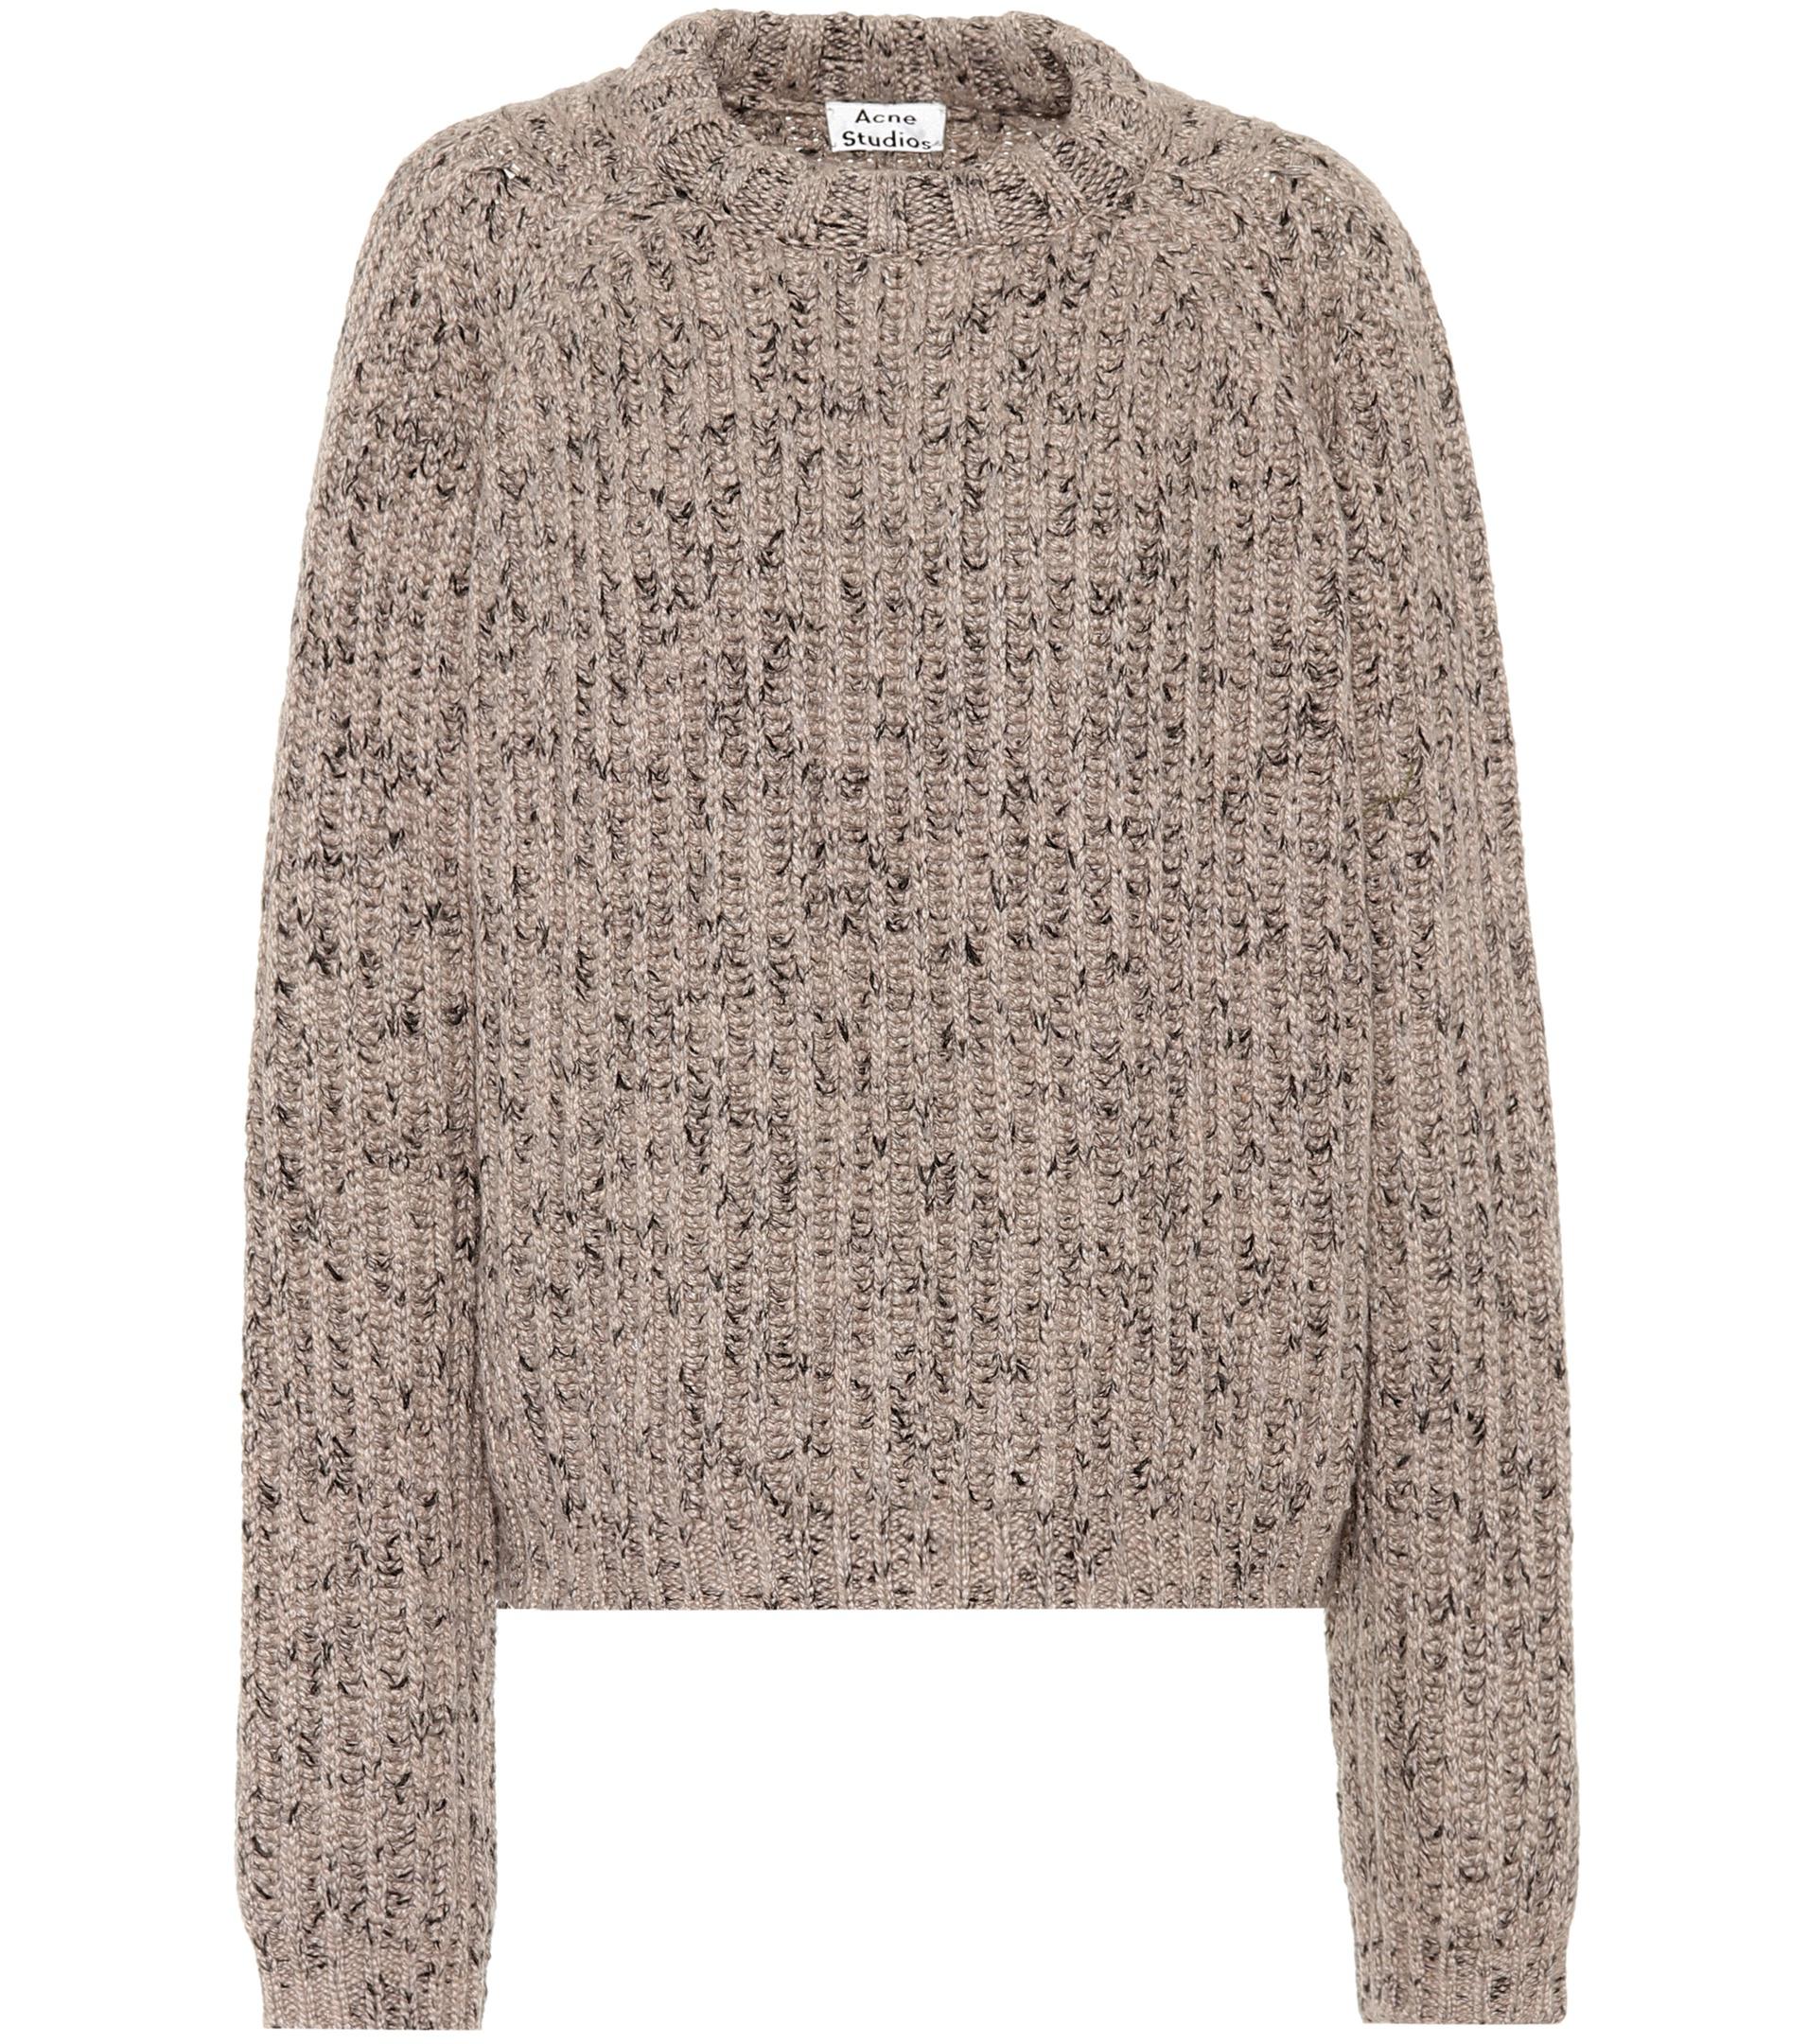 Lyst - Acne Mouliné Sweater in Brown